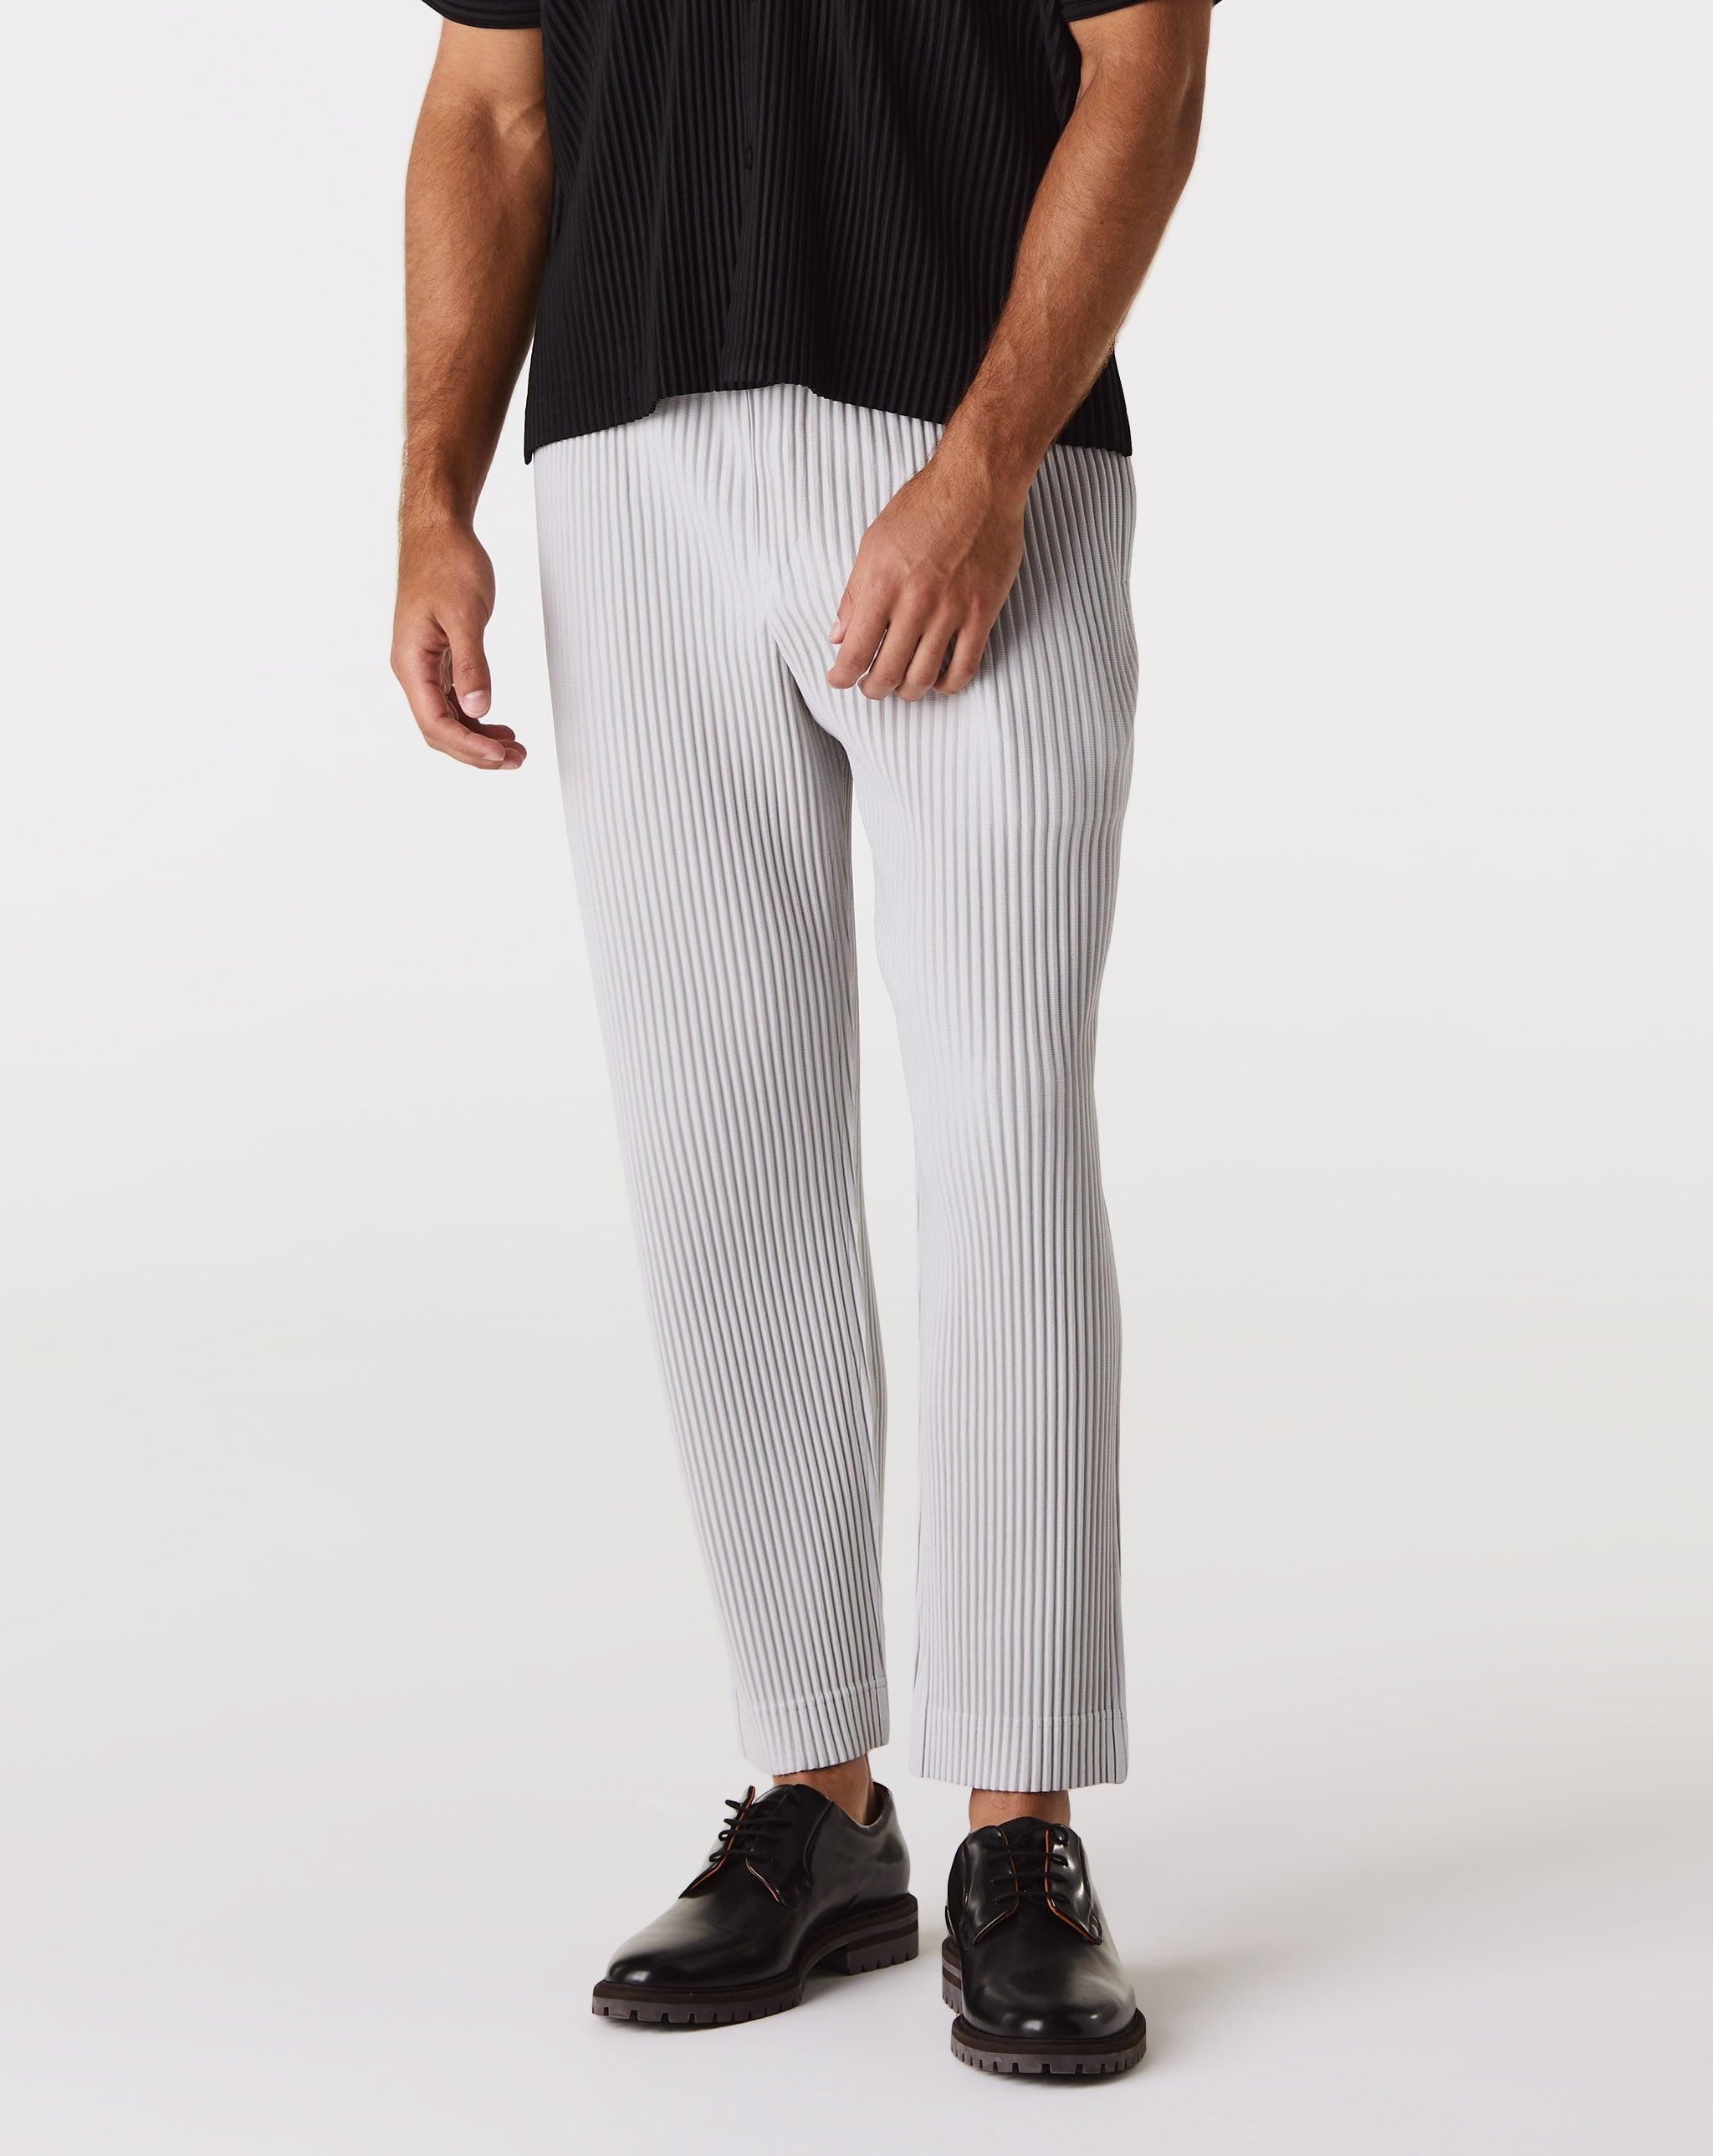 Homme Plissé Issey Miyake Basic Pleated Pants in Black for Men | Lyst